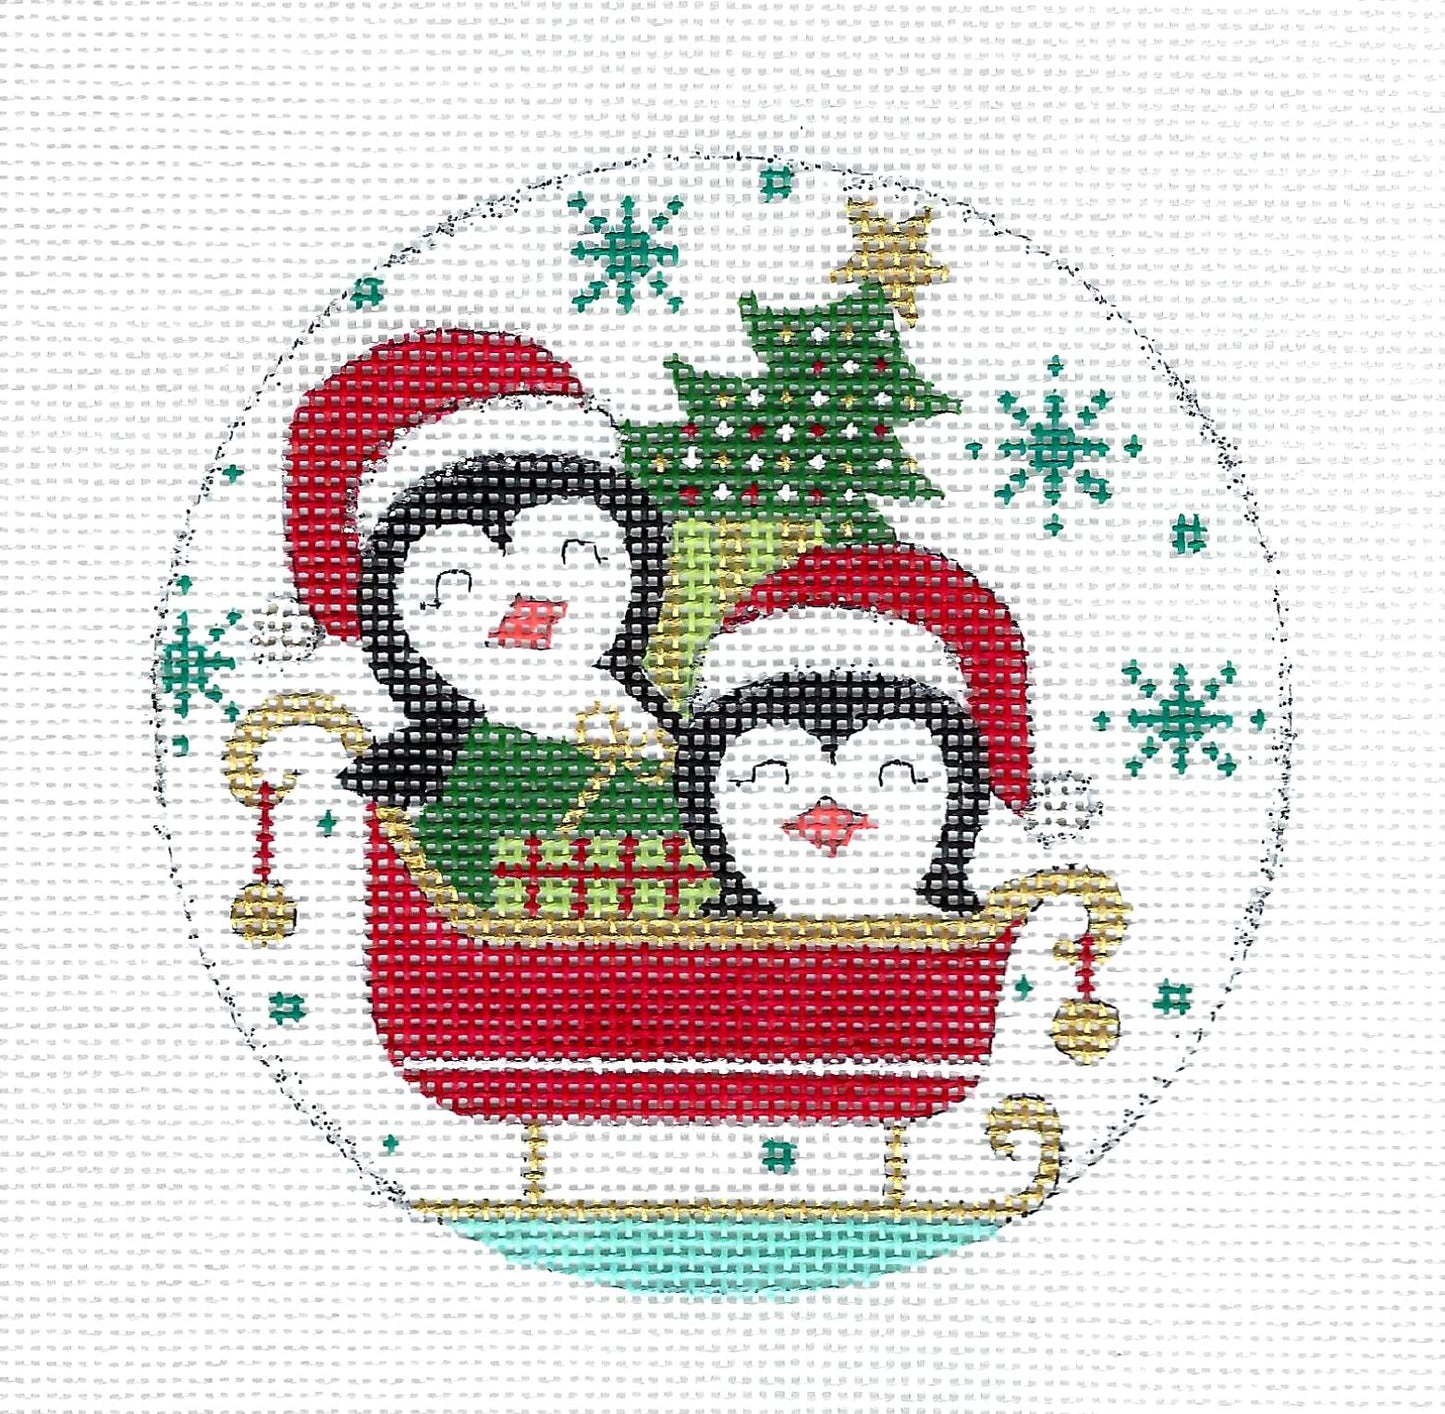 Bird Round ~ 2 Penguins in a Sleigh handpainted 18 mesh Needlepoint Canvas by Alice Peterson